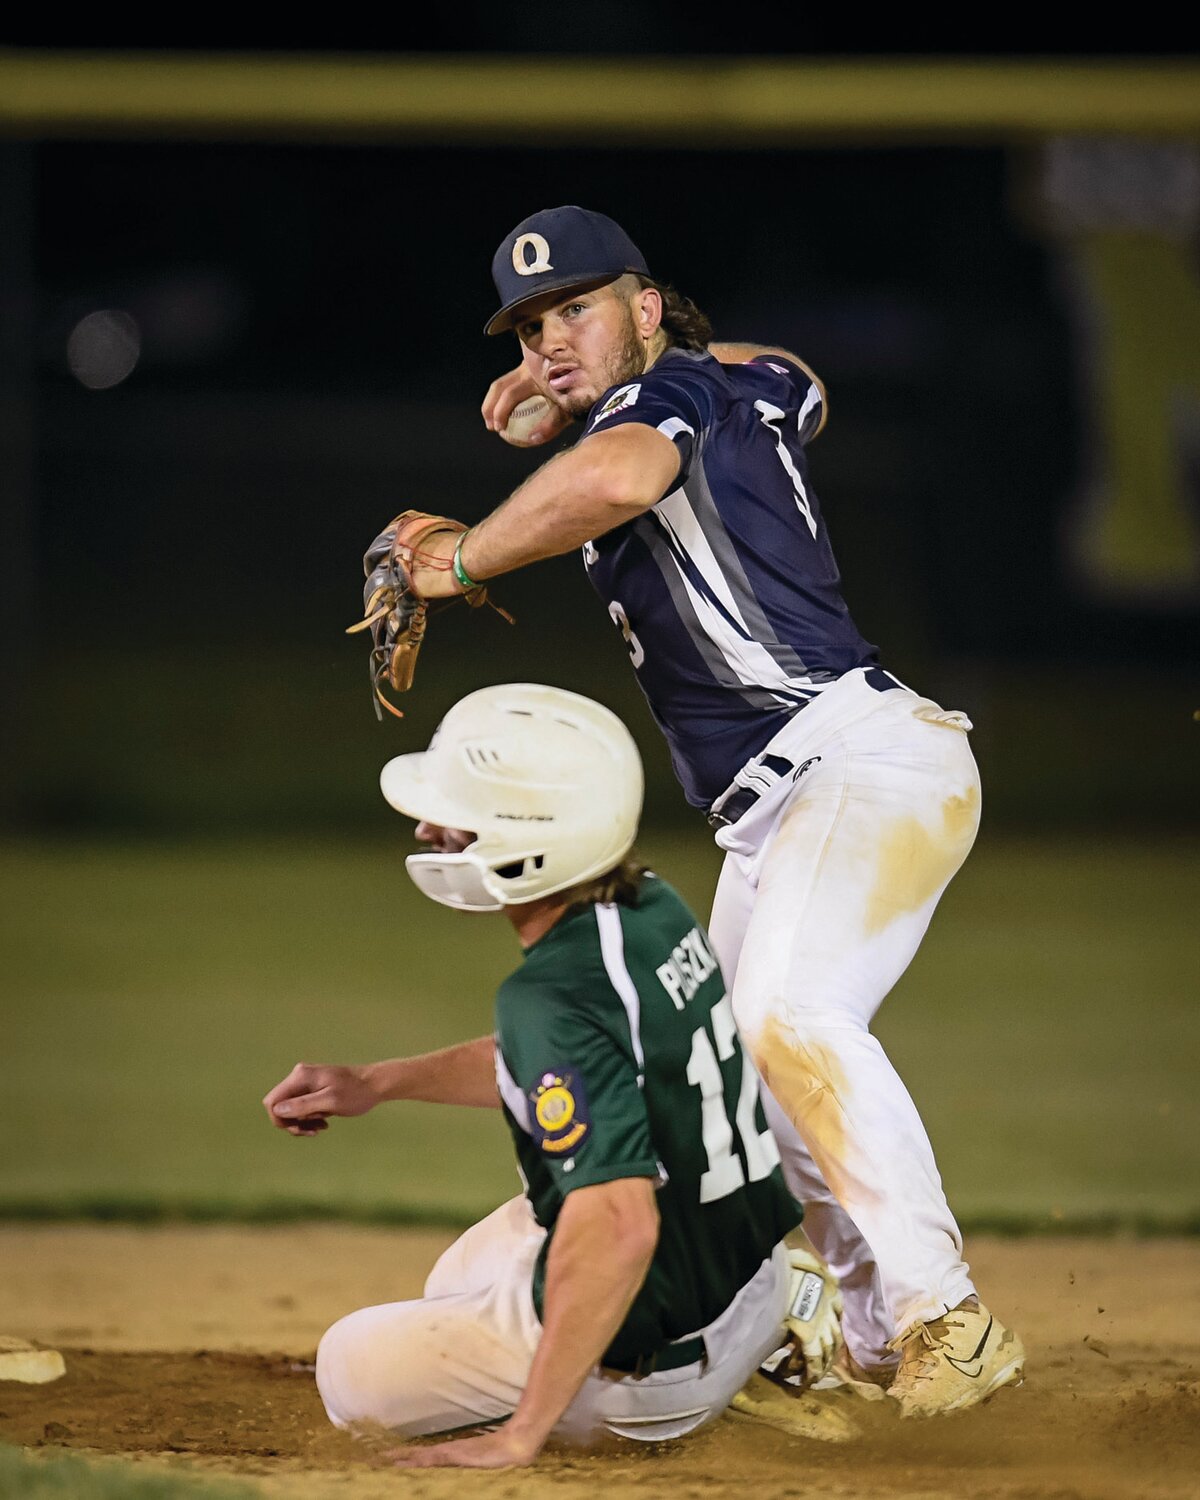 Quakertown shortstop Ty Everitt tries to turn a double play in the bottom of the fourth as Pennridge’s Robbie Pliszka slides in close.